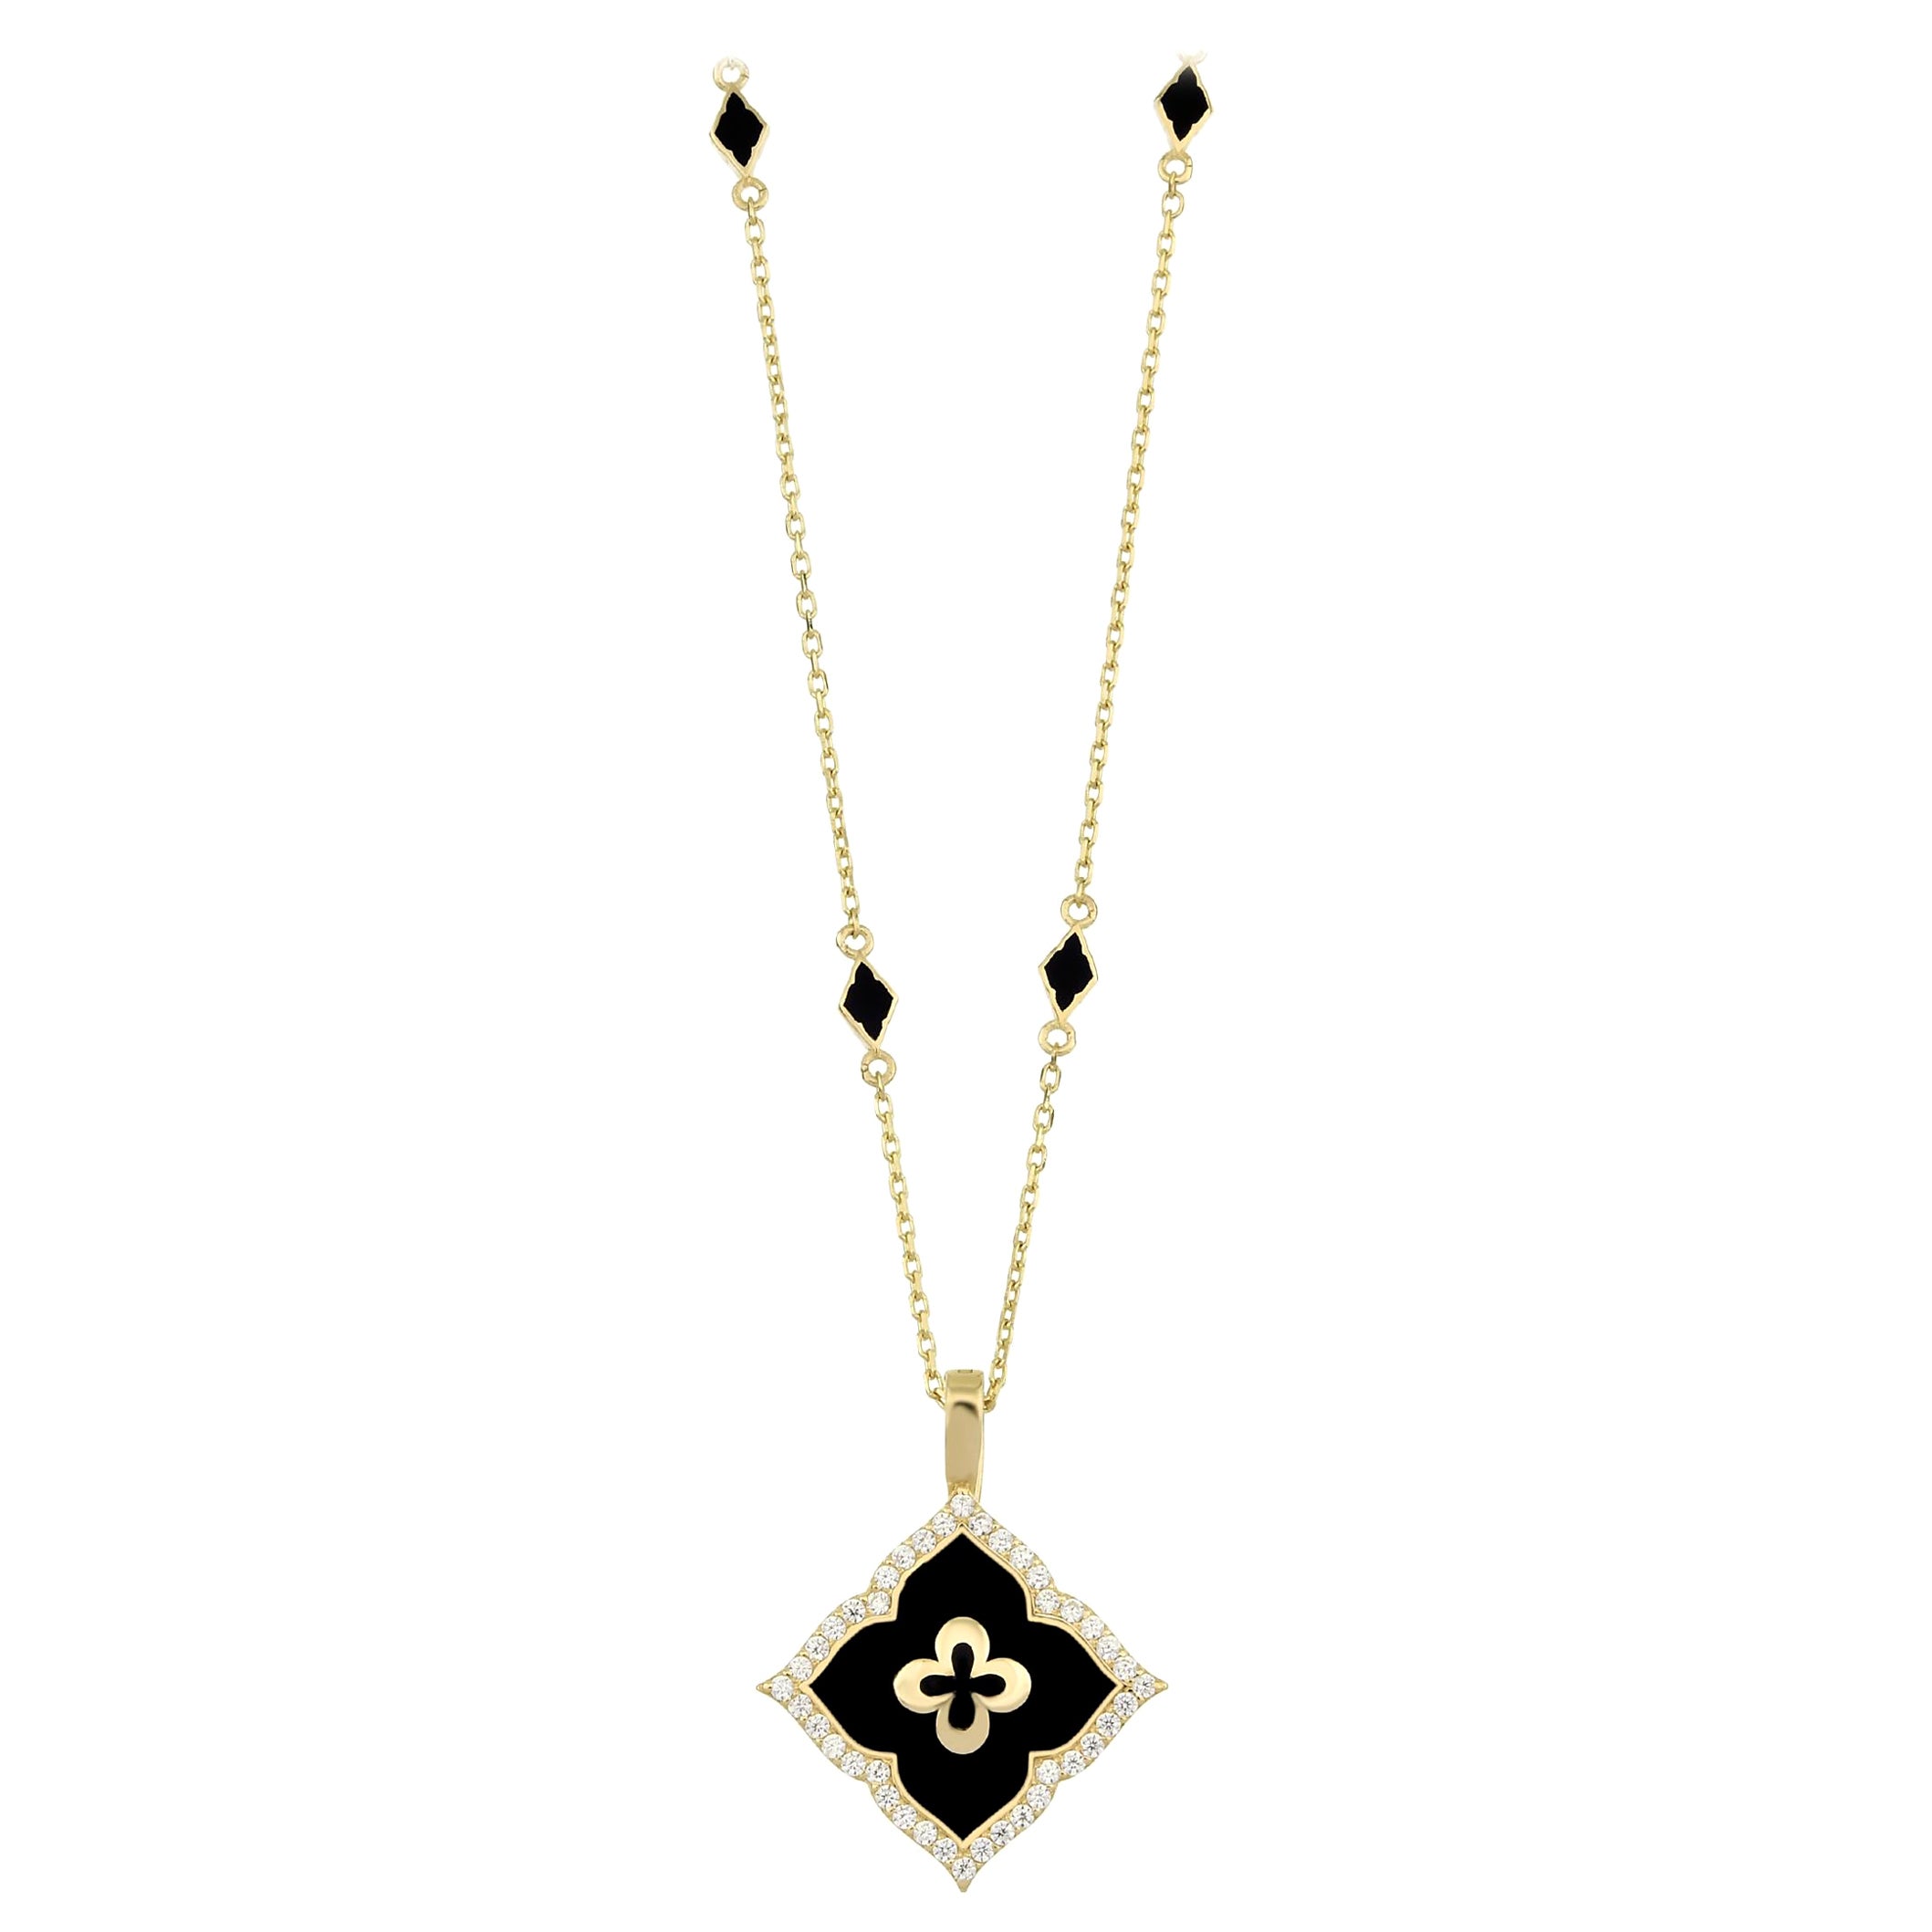 Solid Gold Diamond Necklace with Black Fire Enamel Detailing For Sale